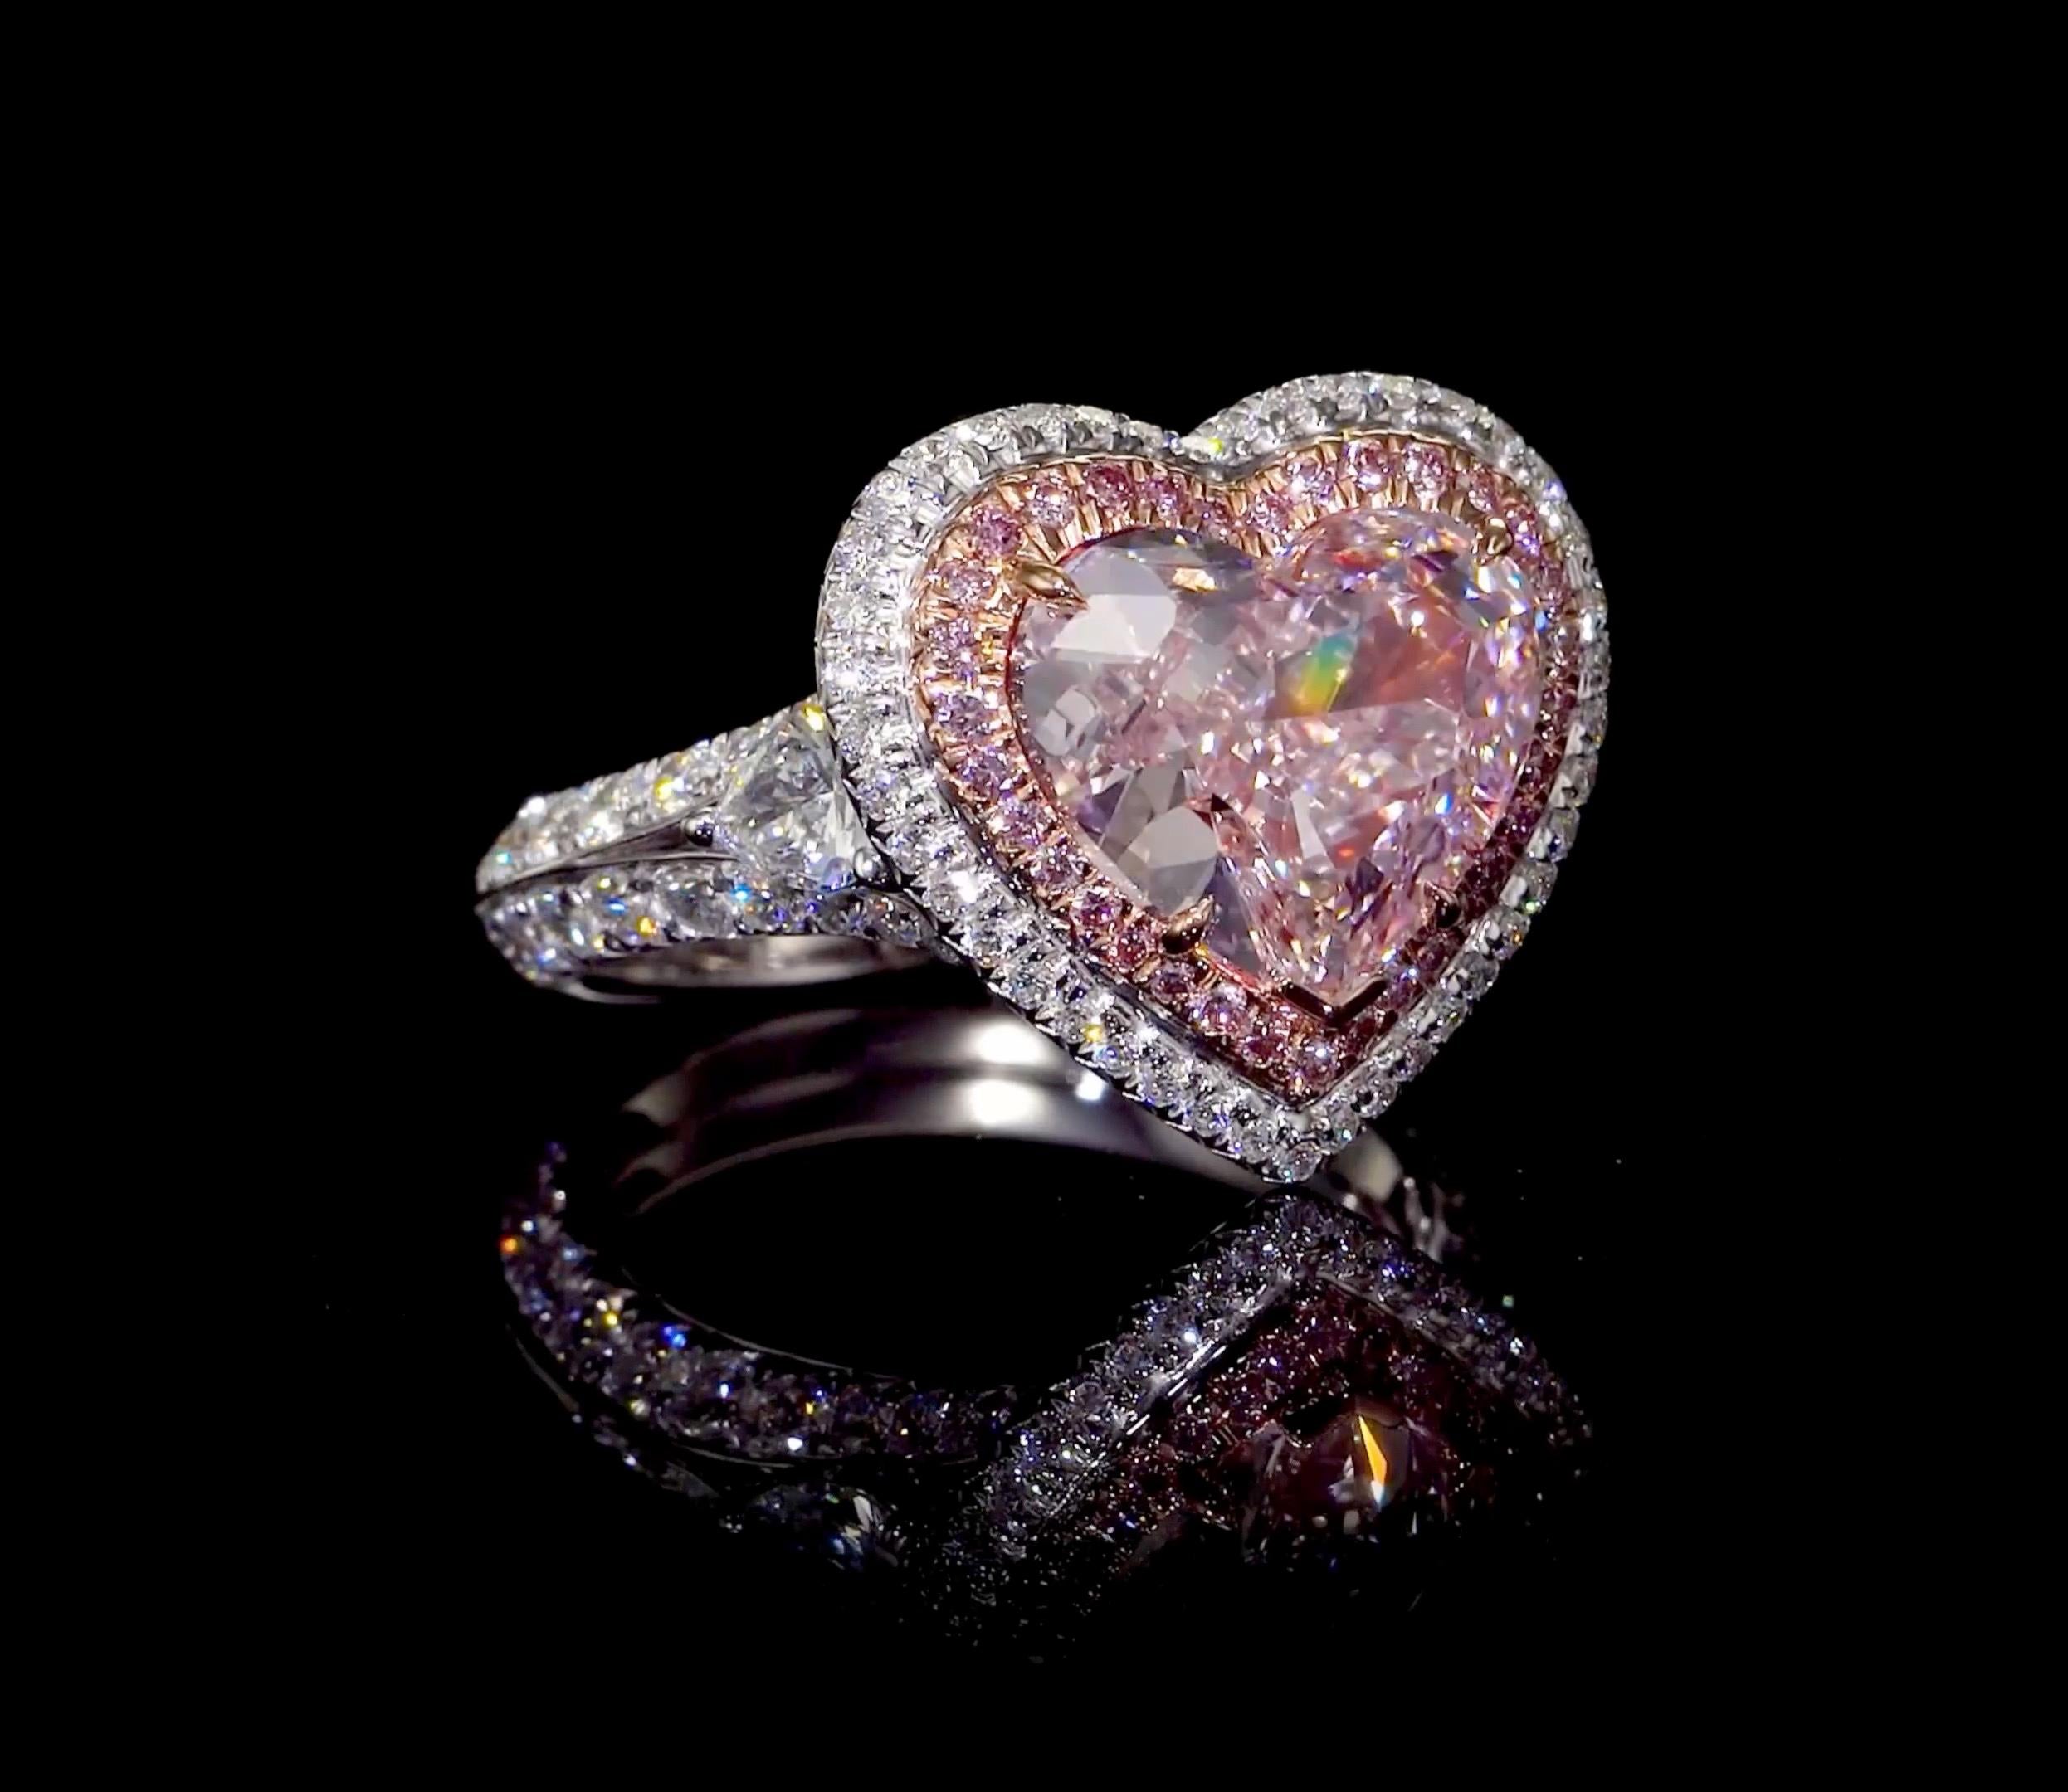 From The Museum Vault At Emilio Jewelry New York,
Featuring a center natural Gia certified fancy light pink diamond internally flawless heart shape center. Filled with tremendous fire, sparkle and dance the center diamond is a dream for whoever will